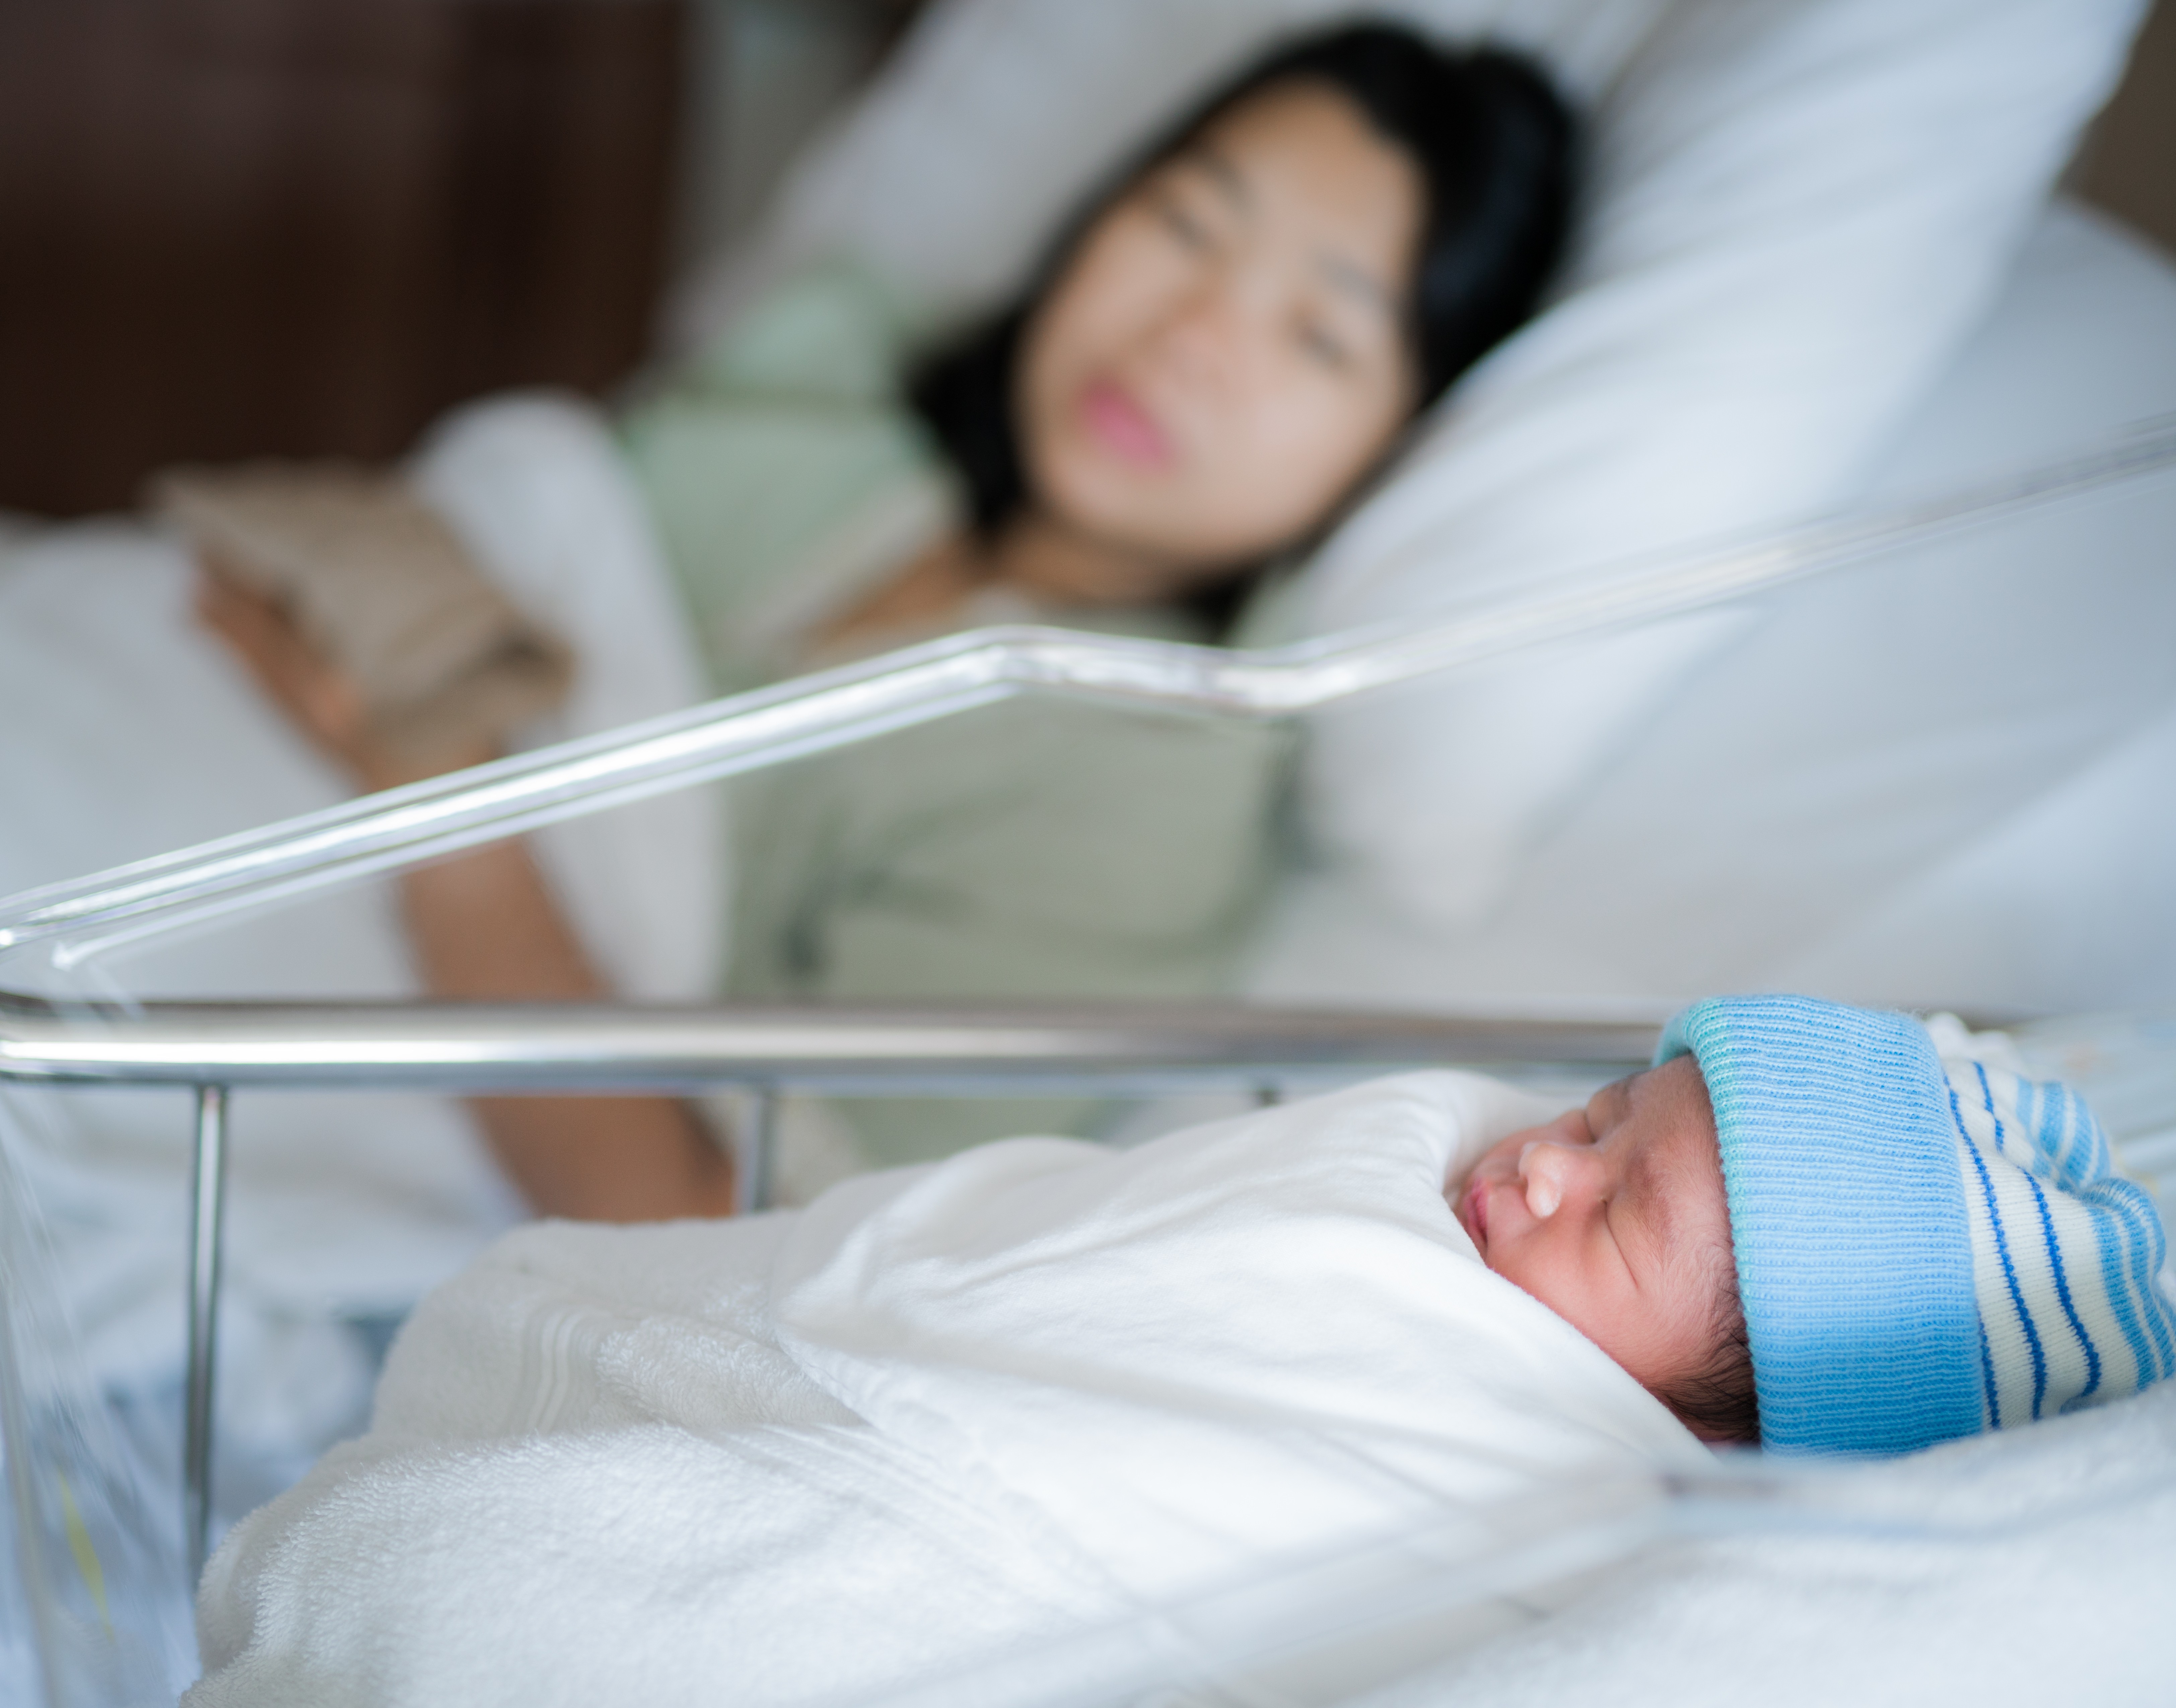 The Hong Kong government has proposed extending maternity leave to 14 weeks. Photo: Shutterstock